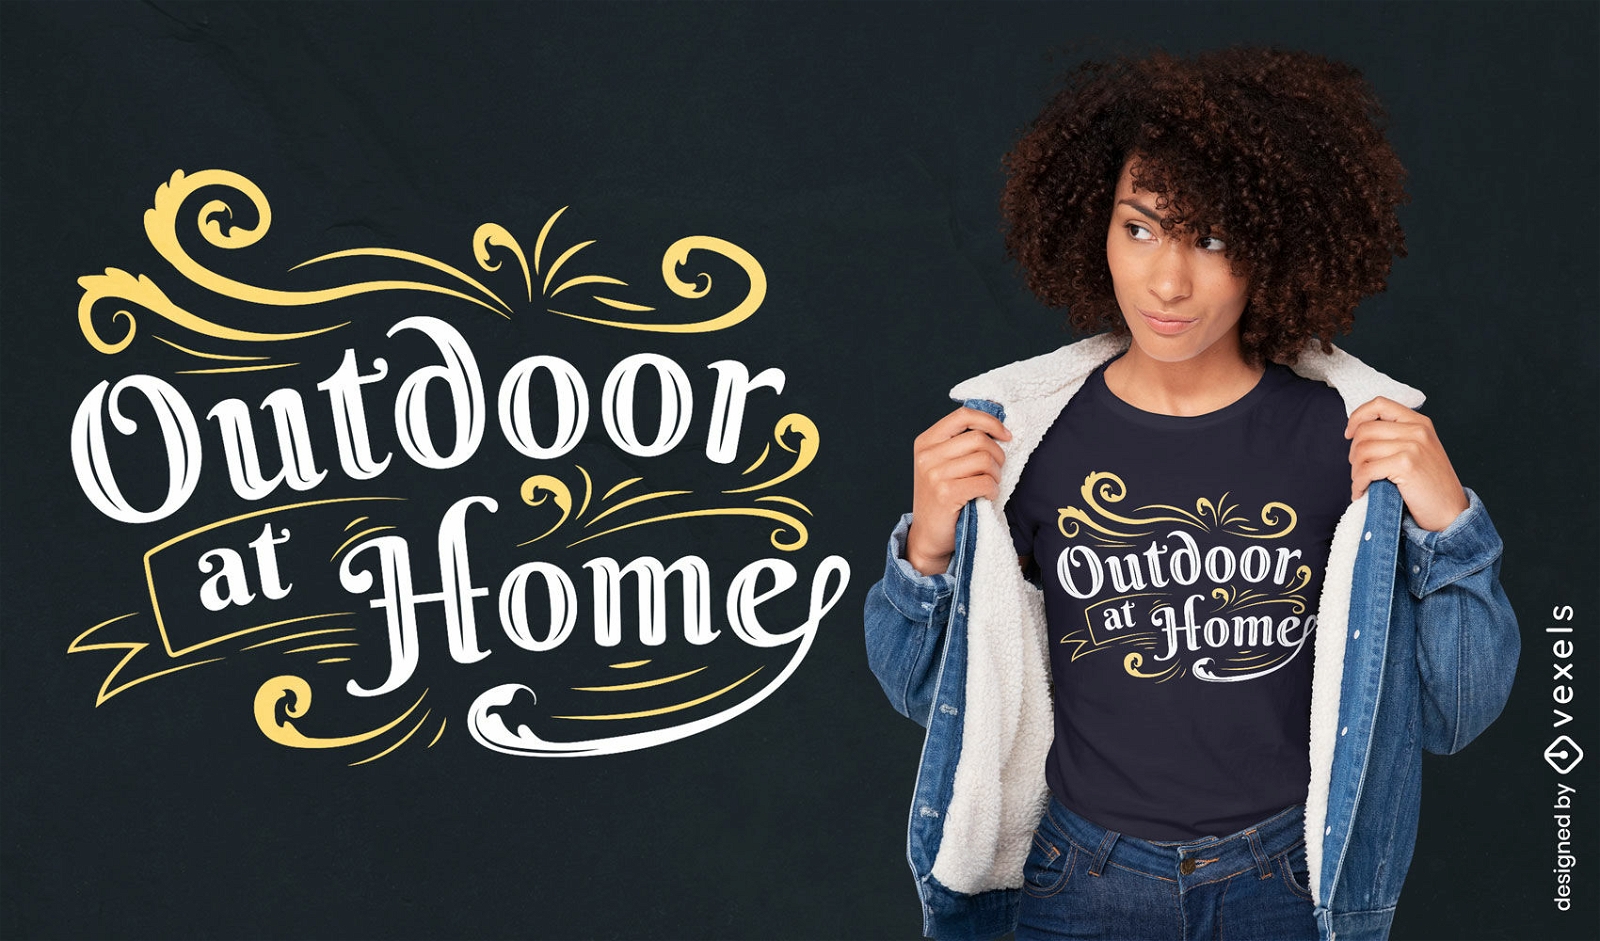 Outdoor at home quote t-shirt design